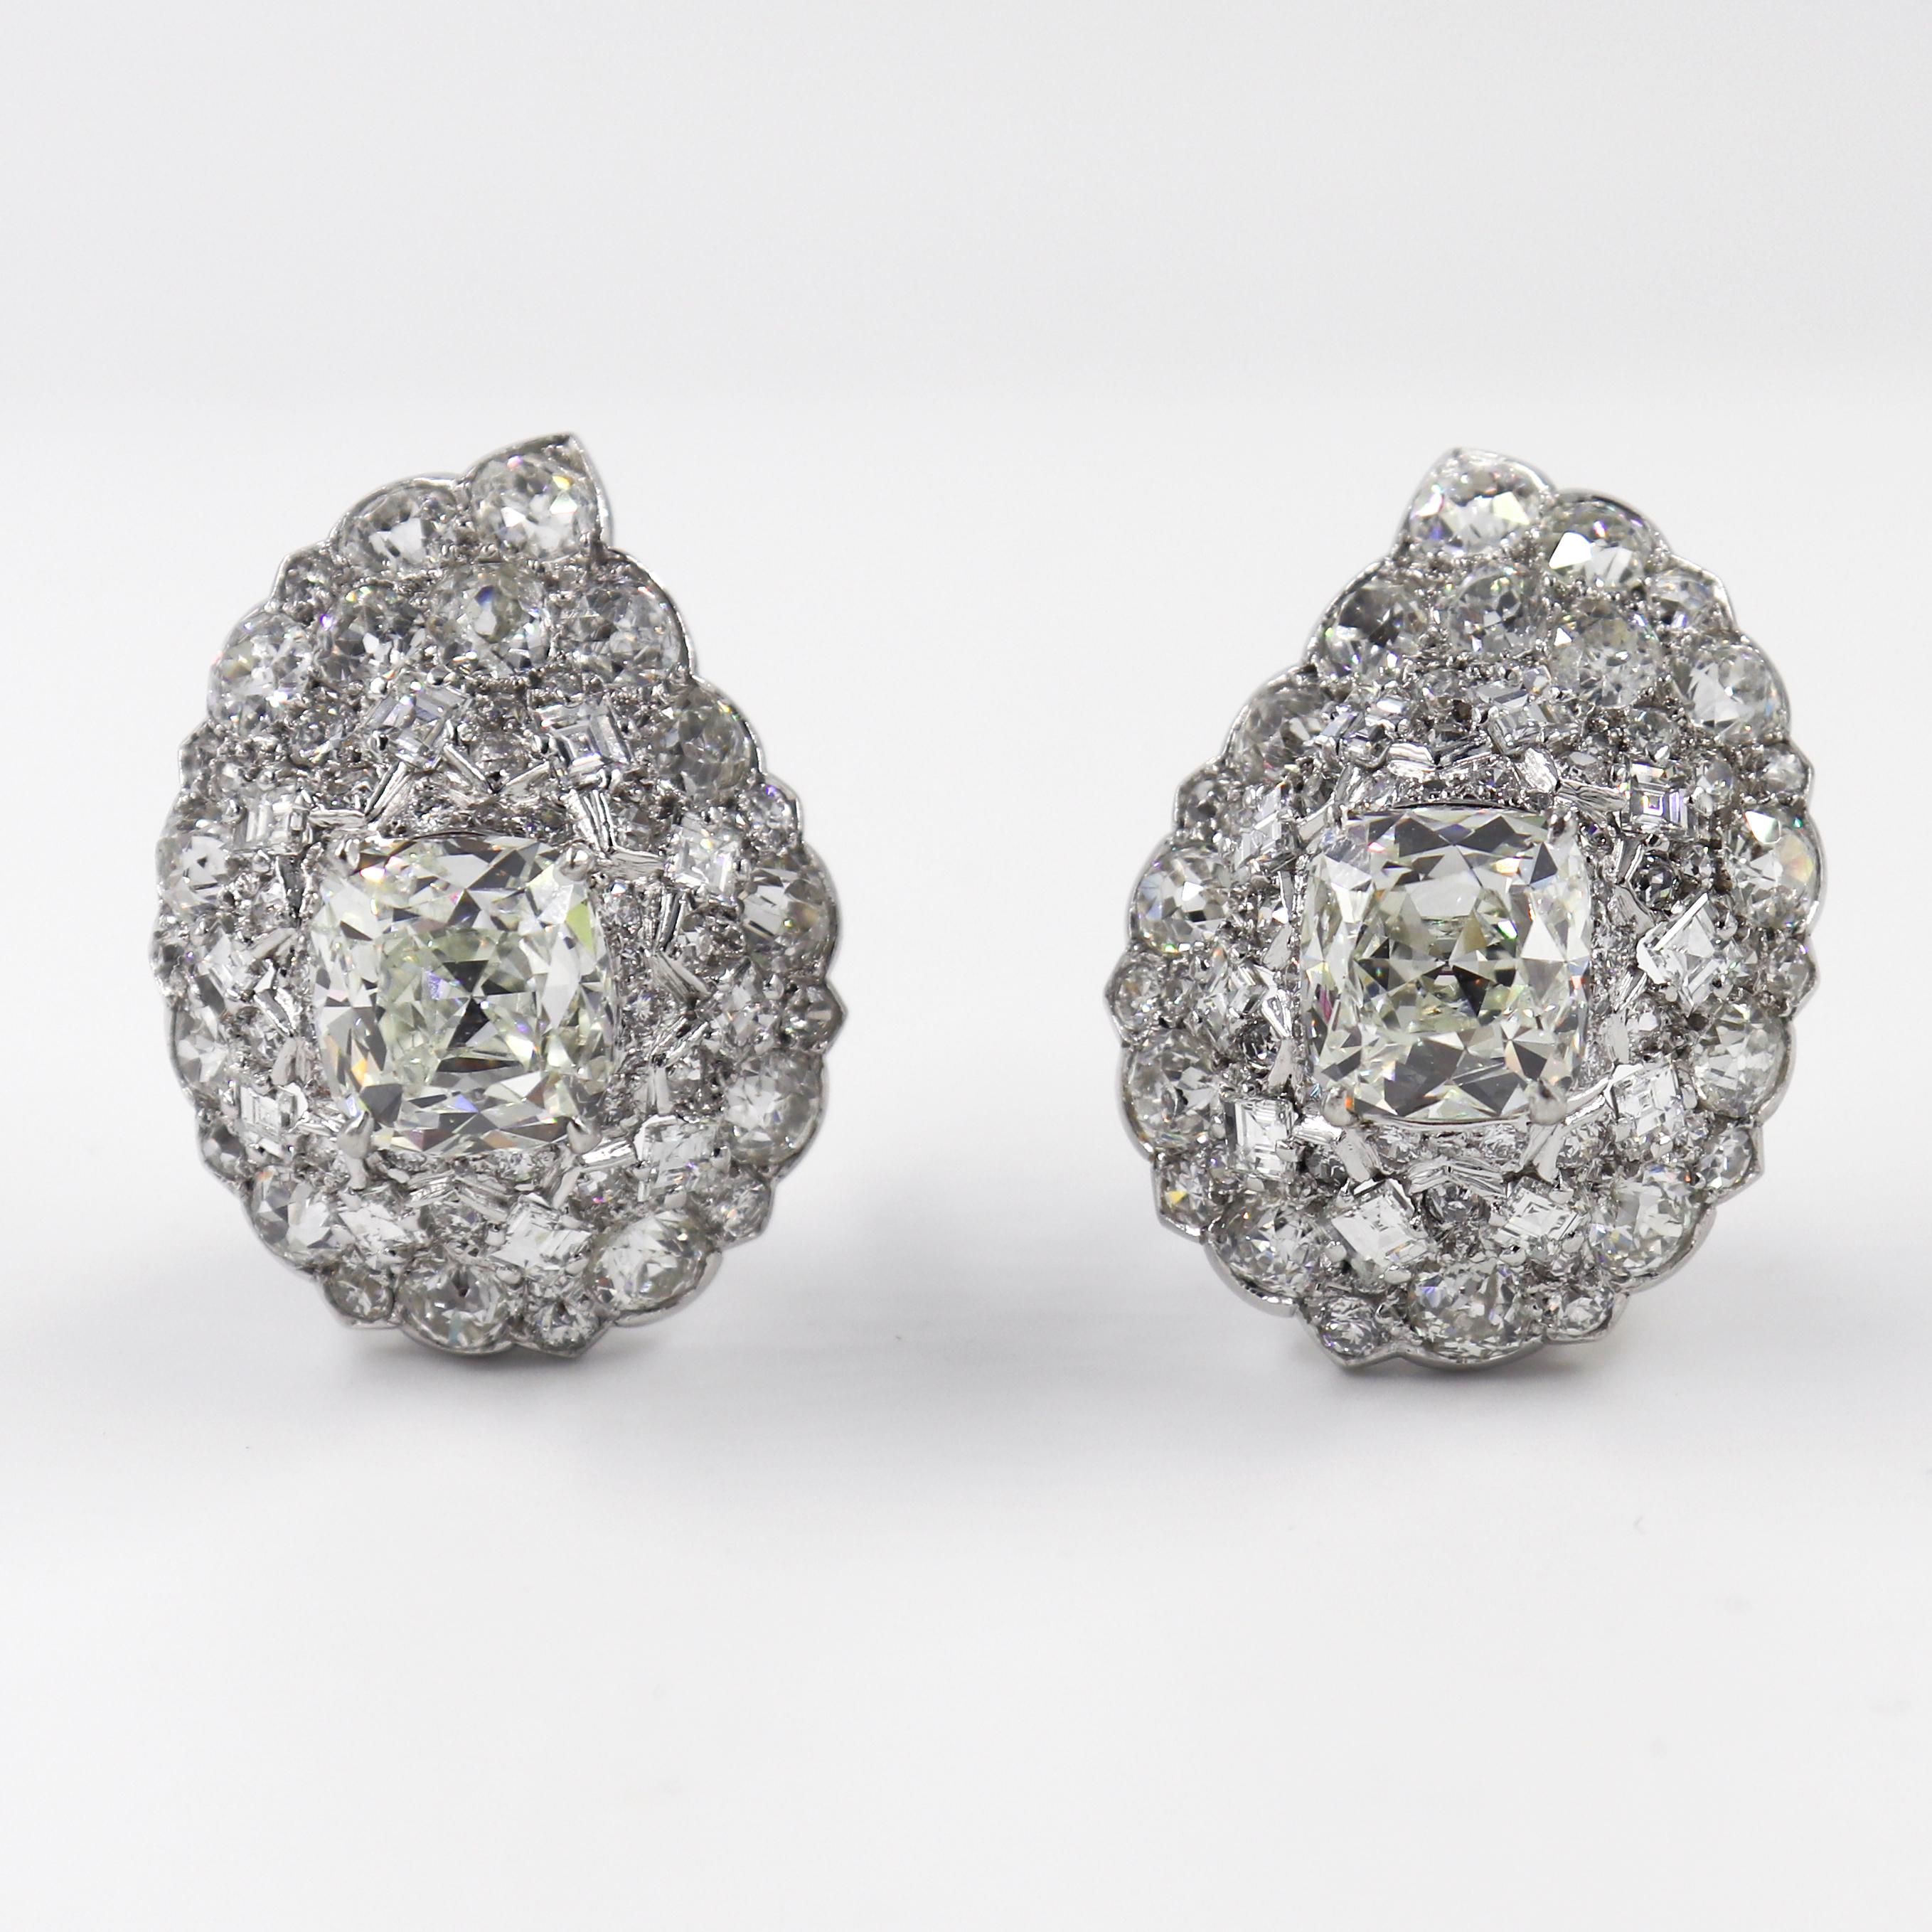 This extraordinary pair of platinum Cartier signed Art Deco era clip-on earrings features an approximately 5 carat cushion cut diamond surrounded by approximately 4 carats of rose cut diamonds for a total carat weight of 18 carats. These exquisite